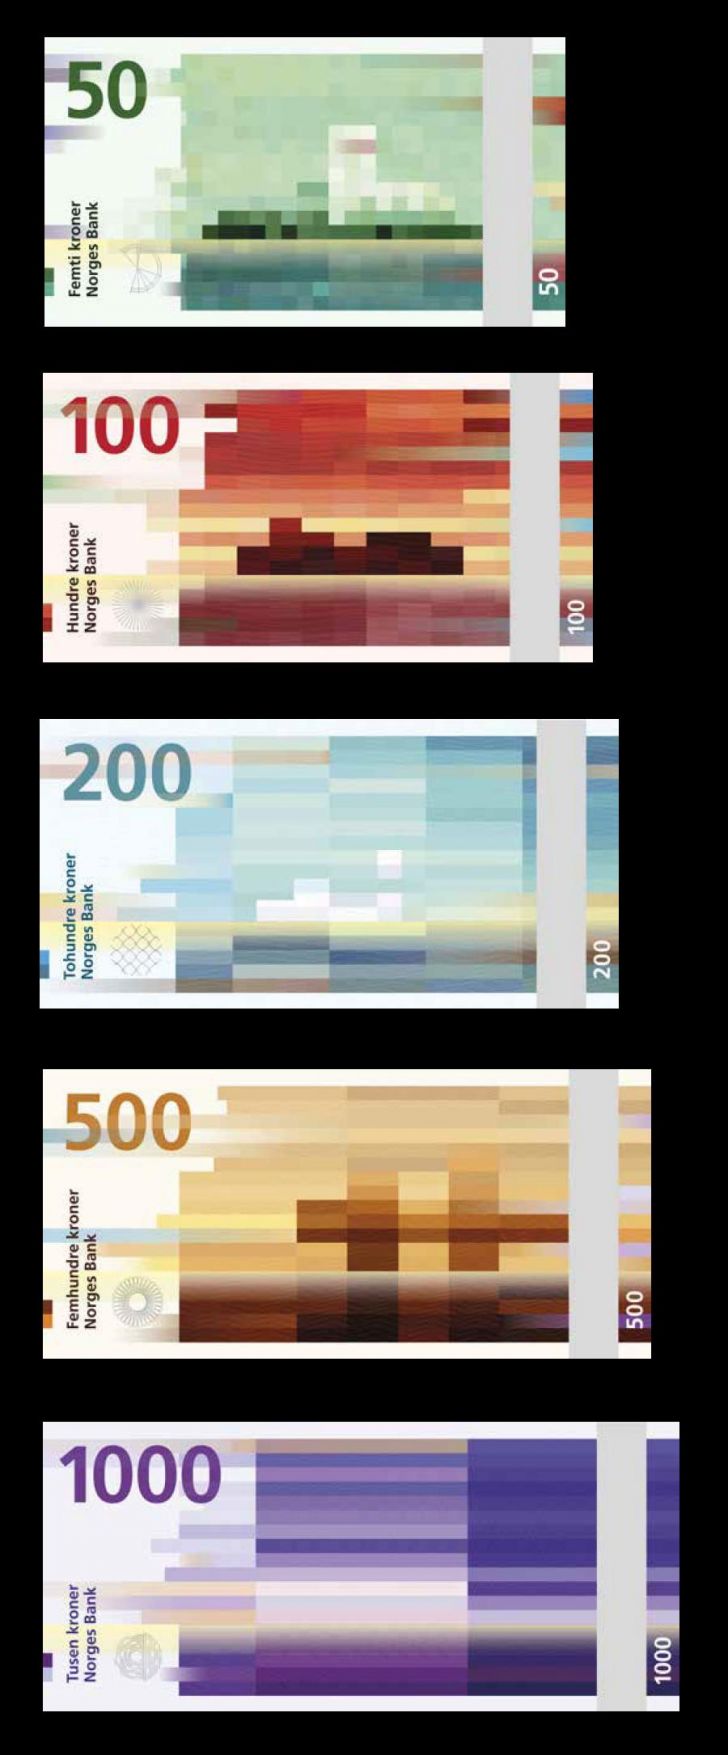 The new norwegian currency design. Yes, really.